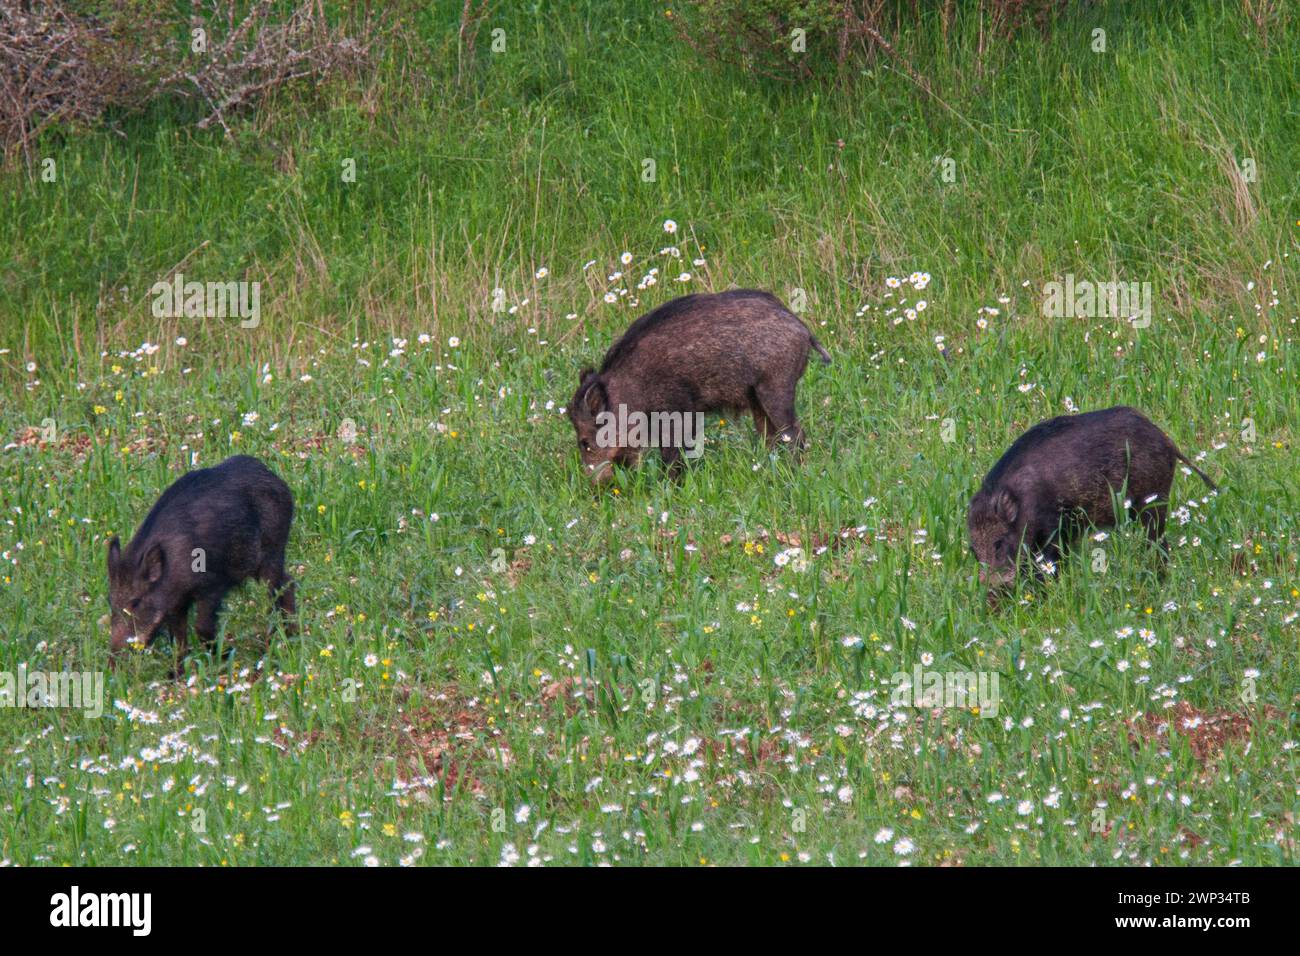 Three wild boars in a flowery meadow, Causse Méjean, Cévennes, Lozère department, southern France Stock Photo